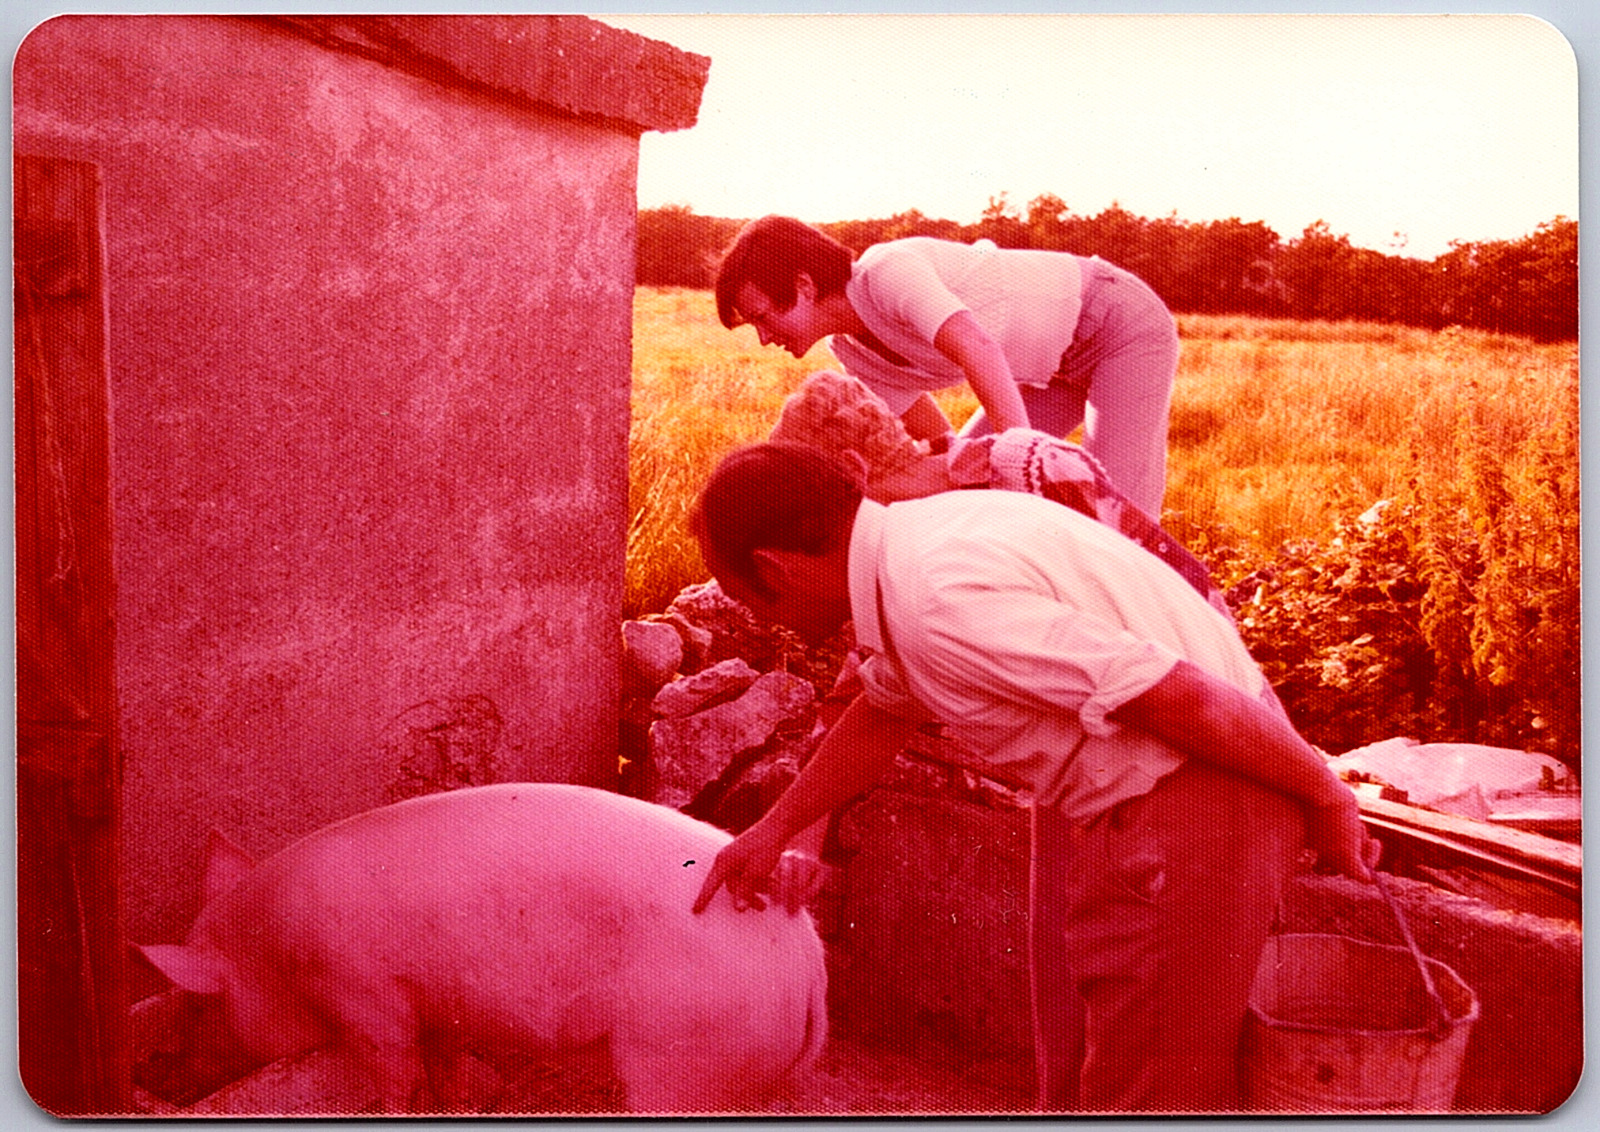 Vintage Found Photo - Women And Man Look At A Big Pig On A Pig Farm In Ireland